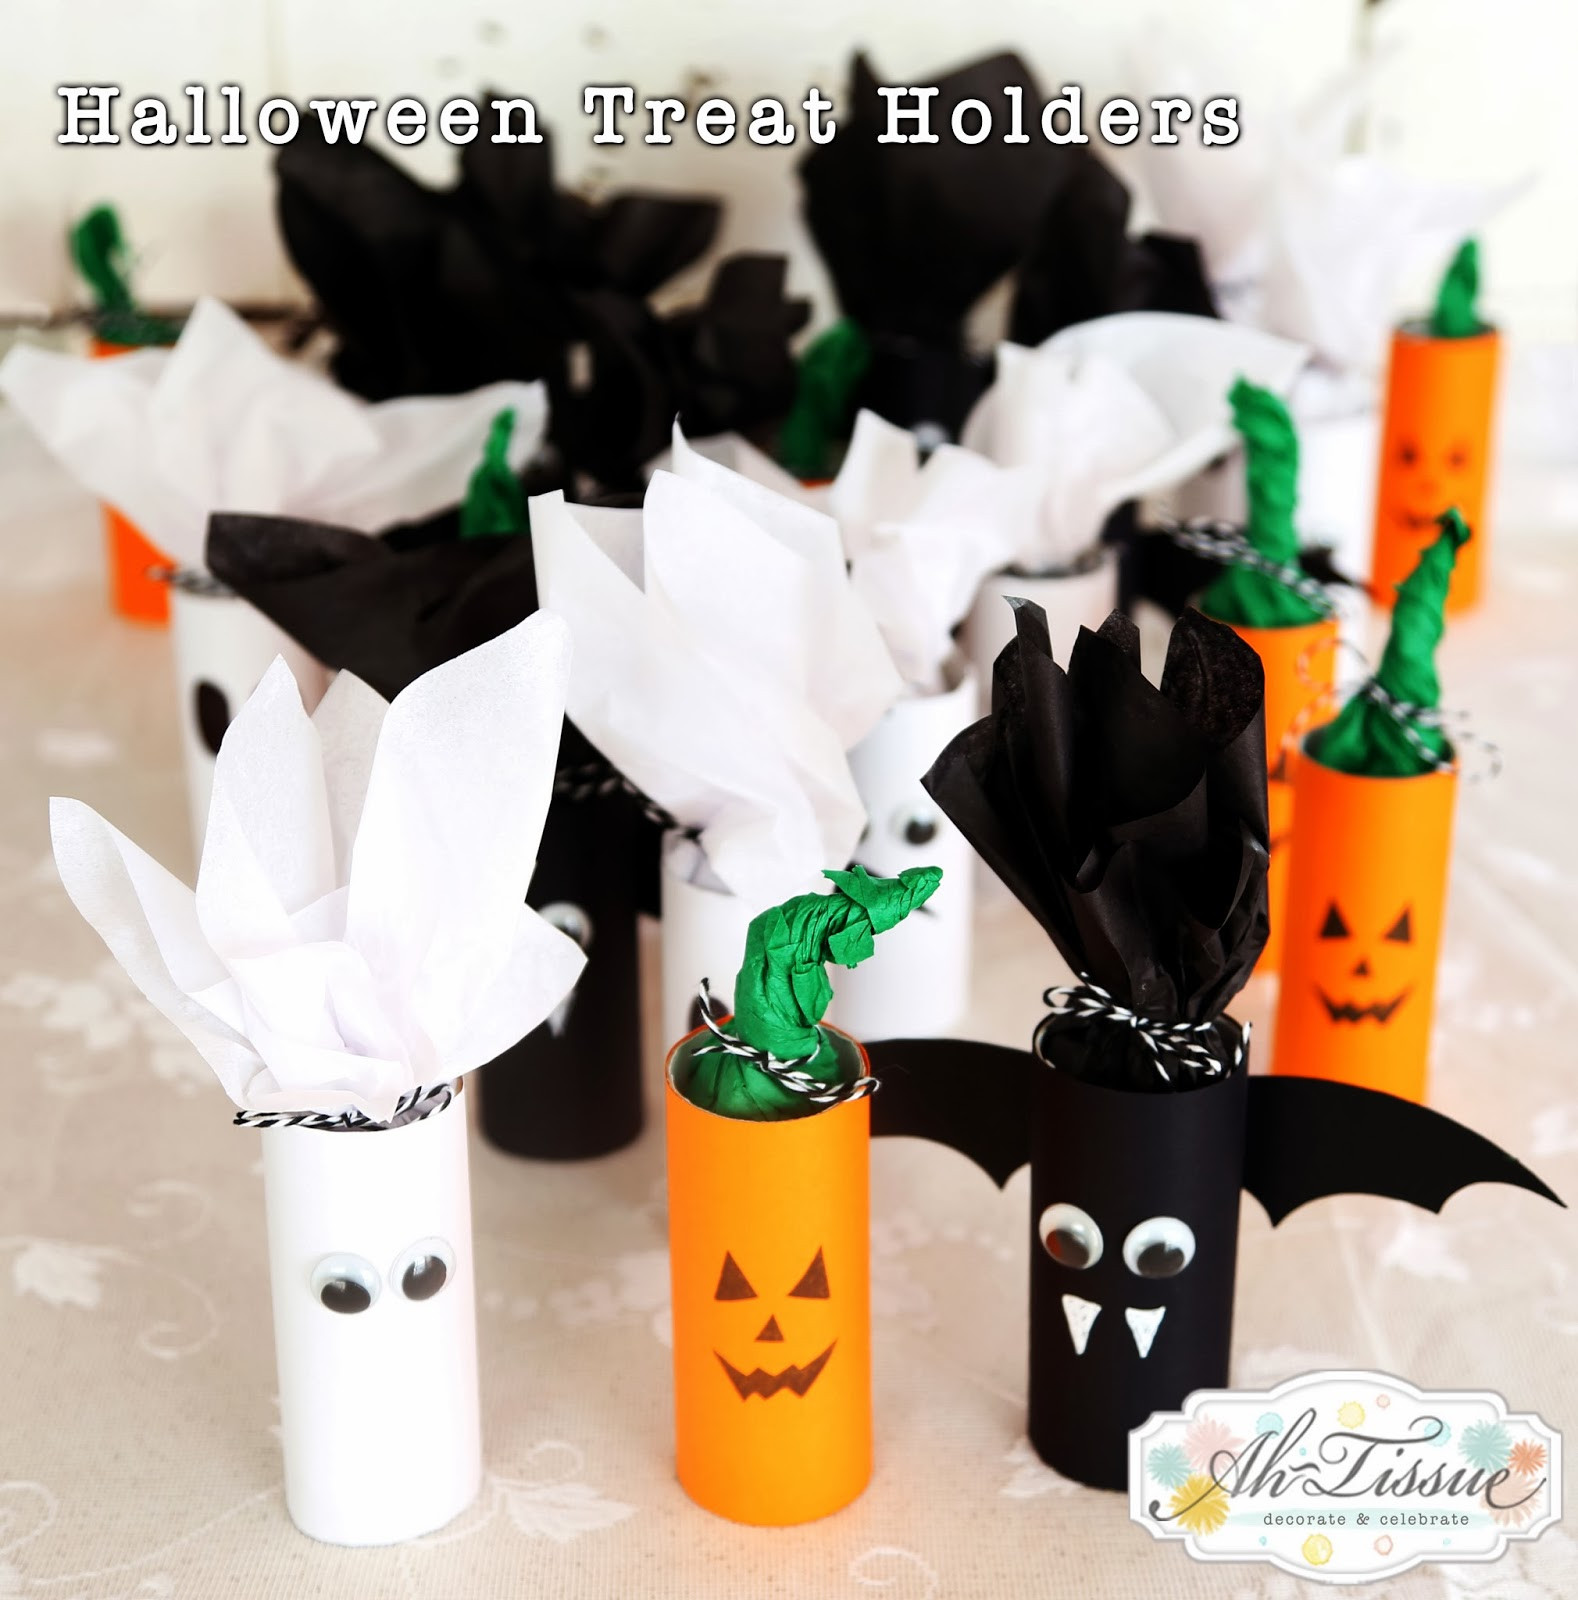 Halloween Toilet Paper
 Get Your D I Y Halloween treat holders made from